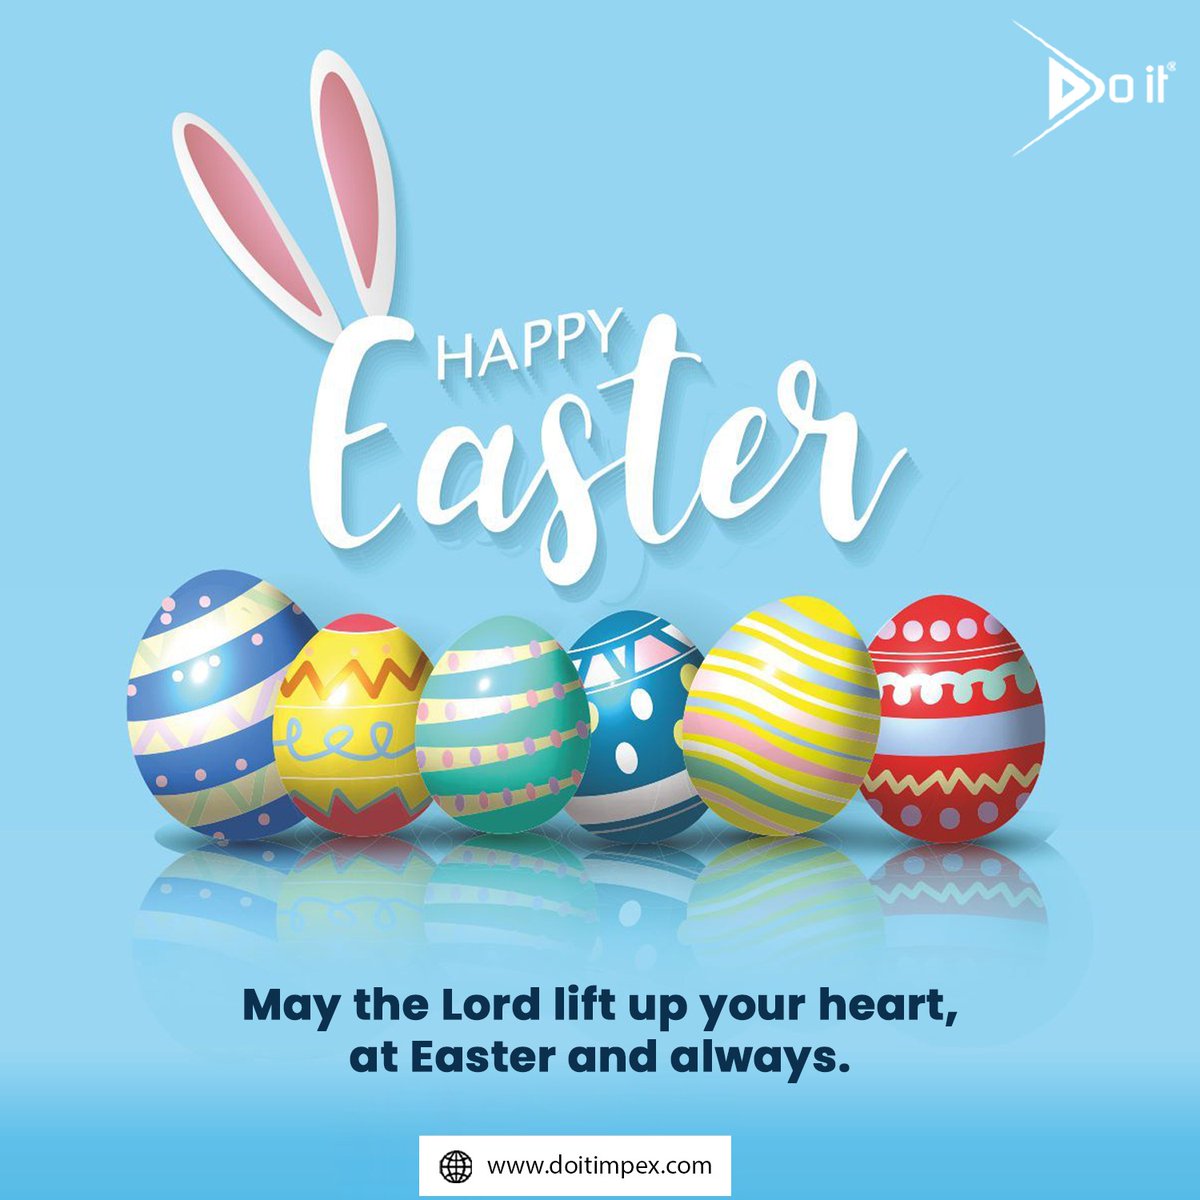 May the Lord lift up your heart, at Easter as always 

Follow @doitimpex 
Follow @doitimpex 

#easter #happyeaster #doitimpex #jewellerymanufacturer #indianbusiness #indianproducts #indianjewellery #jewellerysolution #solution #goldjewelry #polishing #explorepage✨